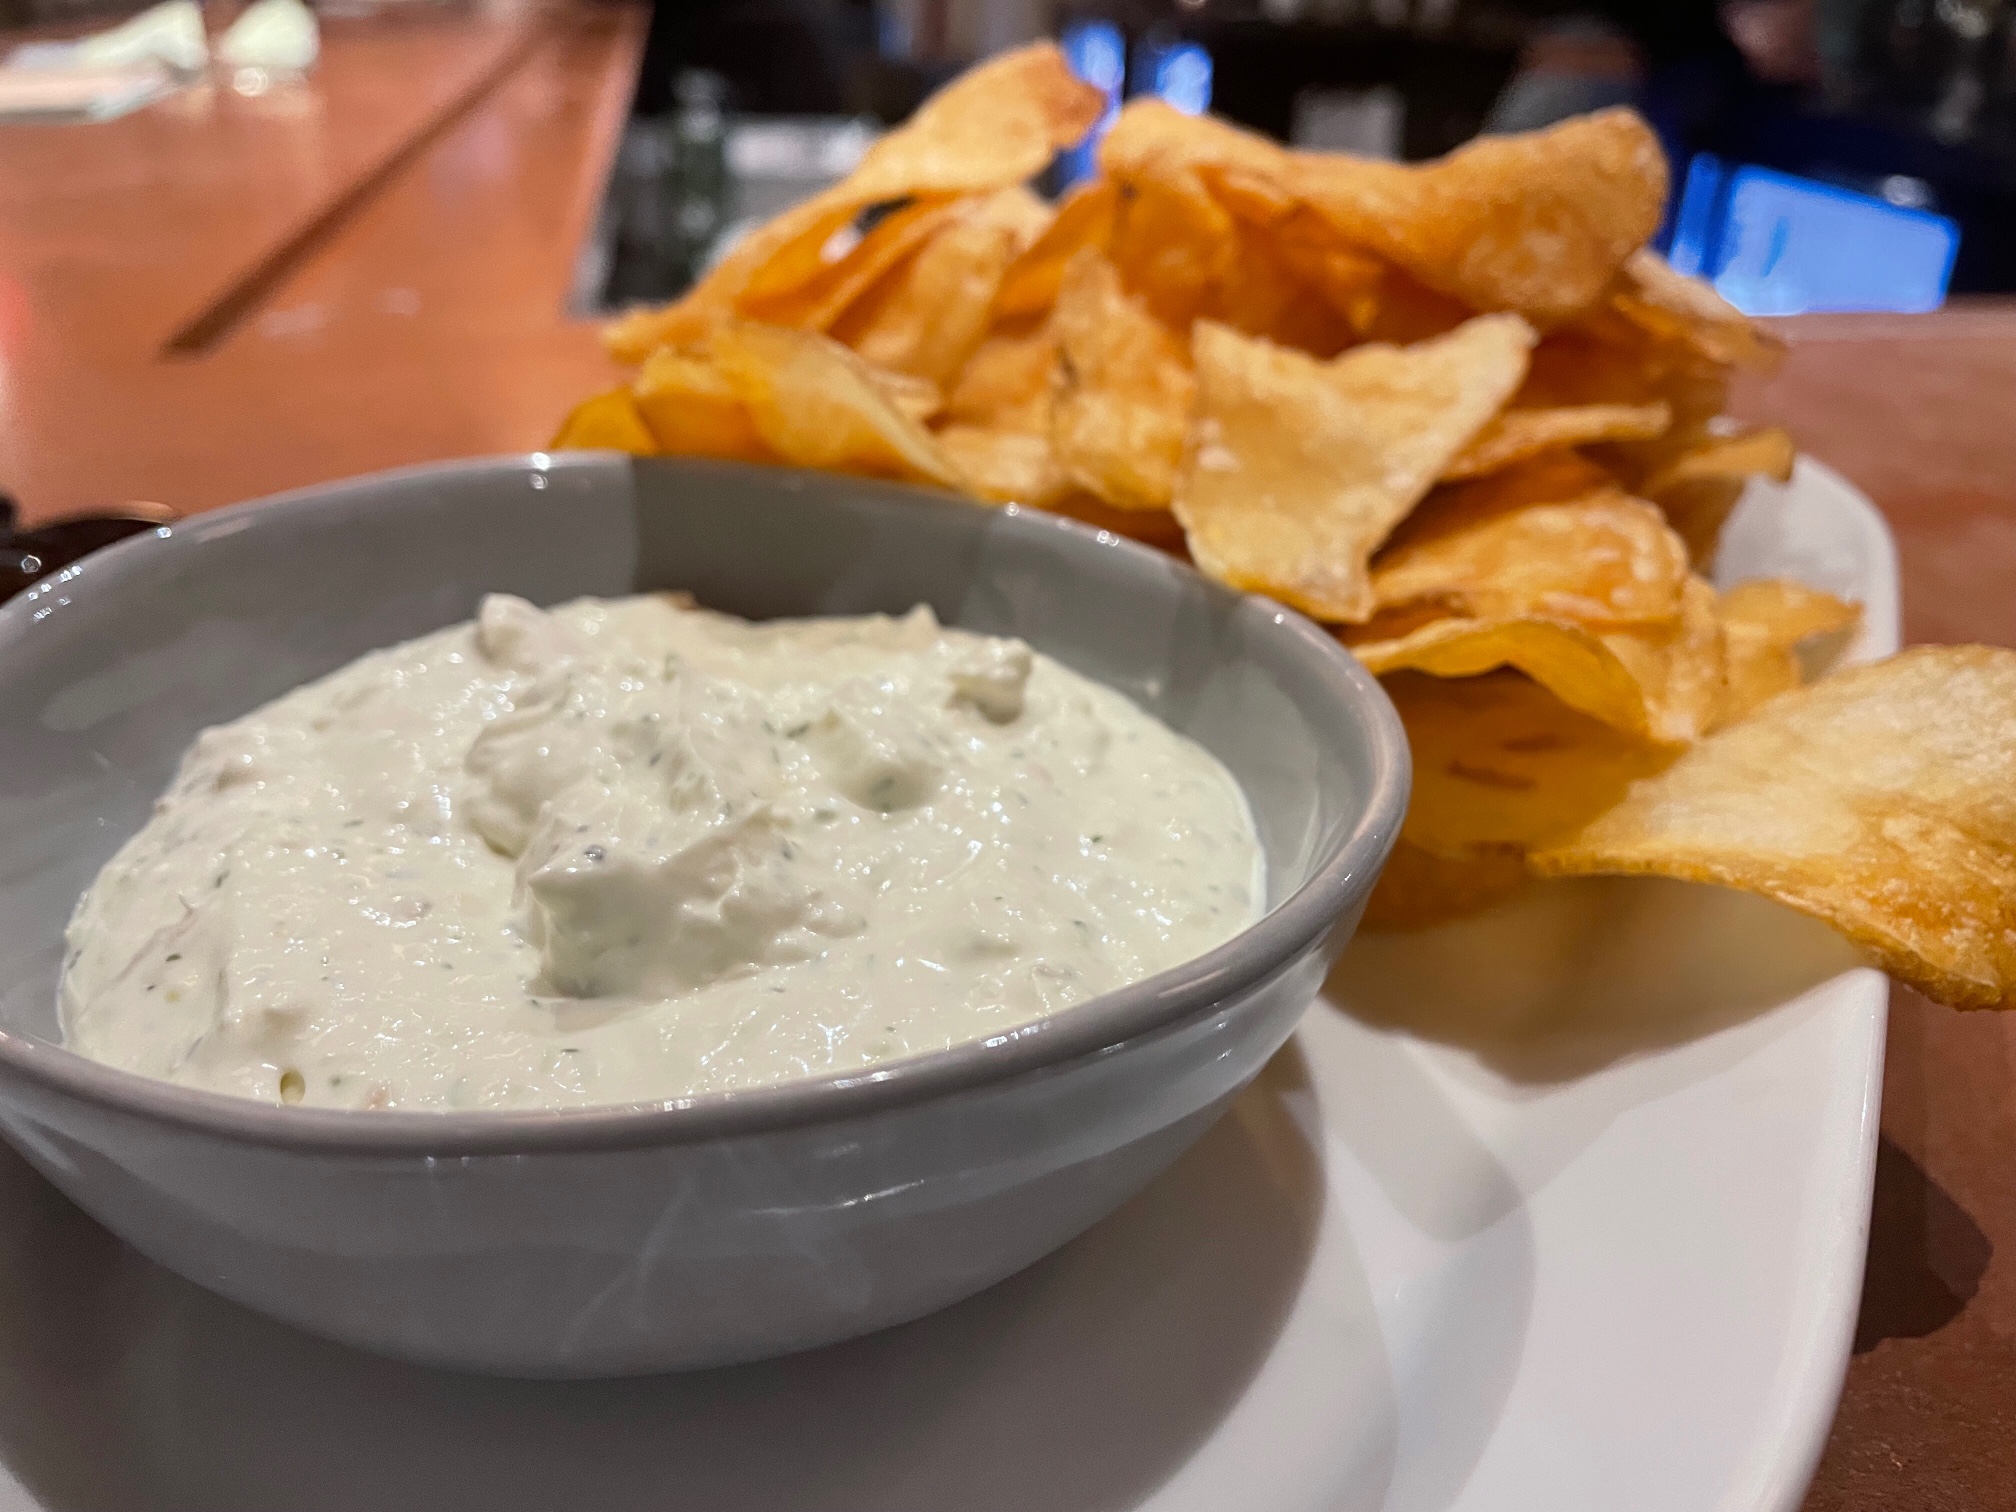 On a brown table, there is a long white platter with a bowl of white trout dip and a big portion of potato crisps. Photo by Alyssa Buckley.